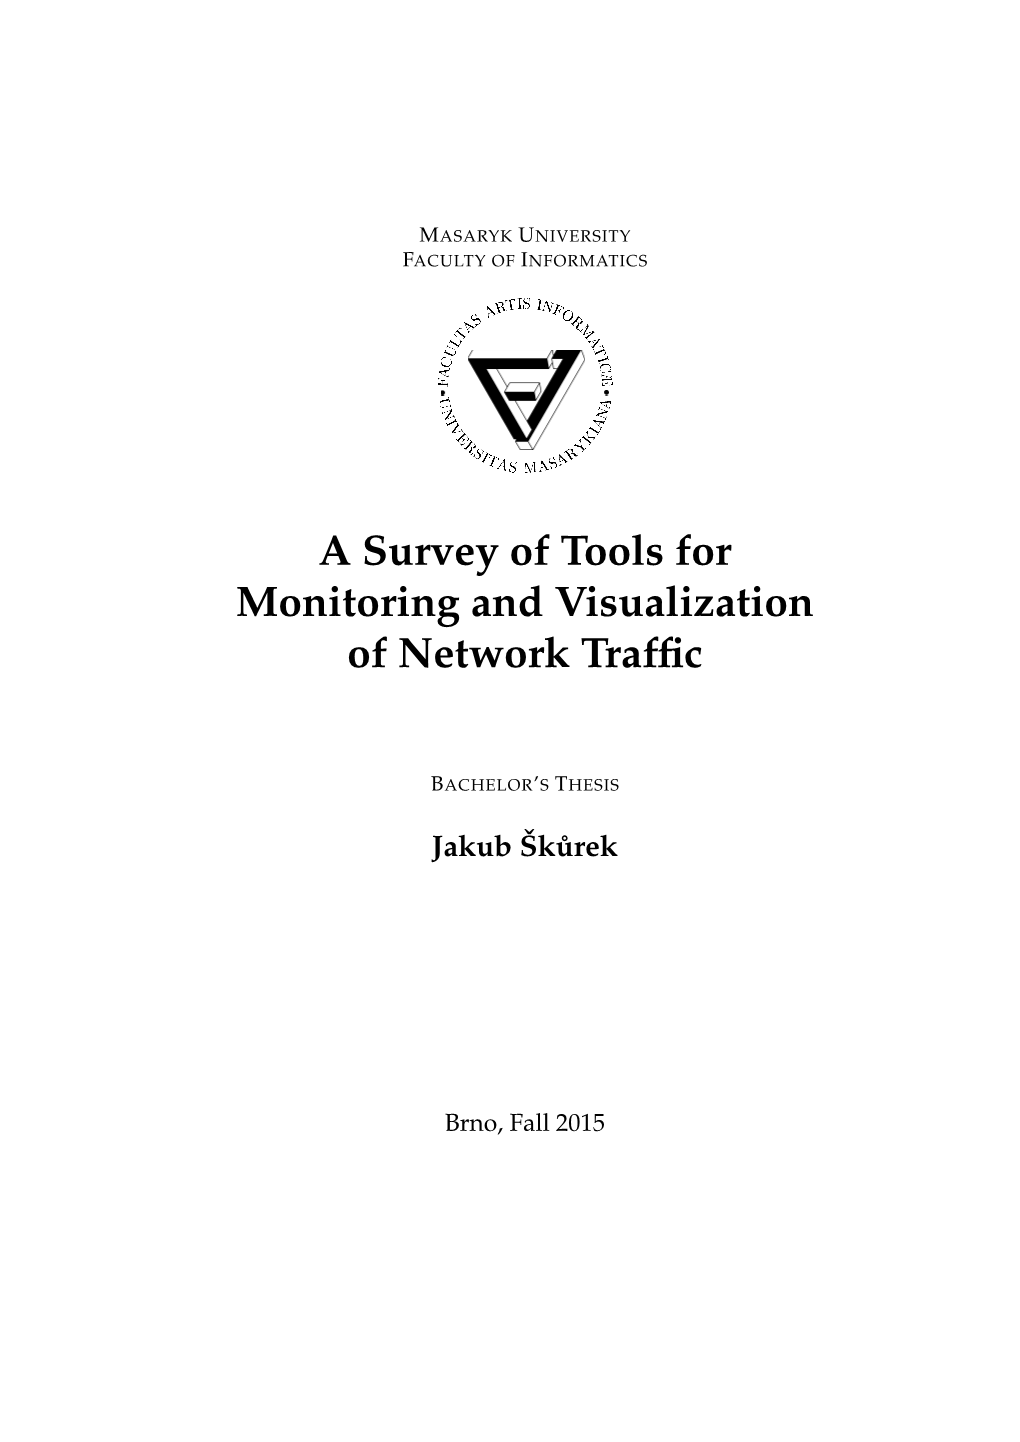 A Survey of Tools for Monitoring and Visualization of Network Traffic